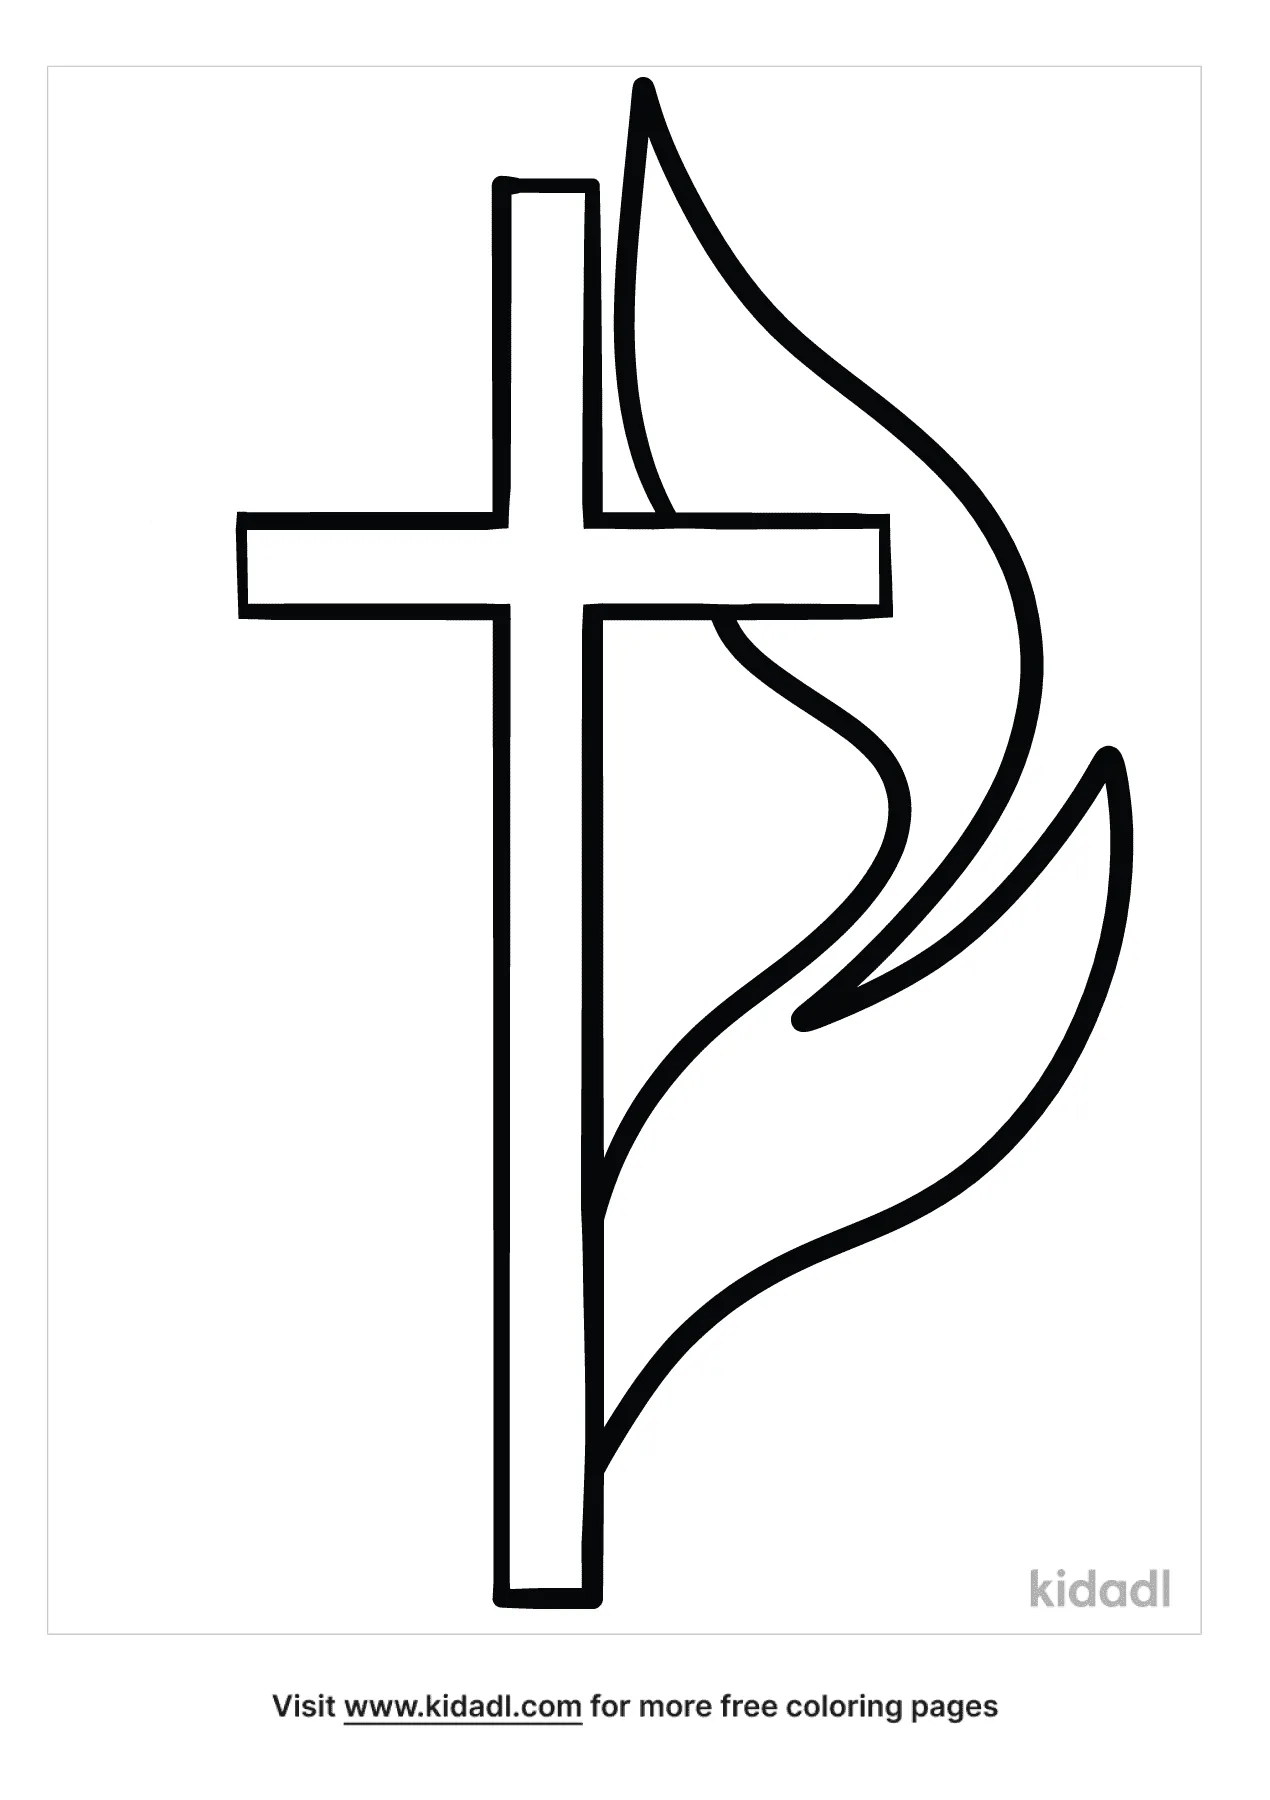 Methodist Cross Flame Coloring Page